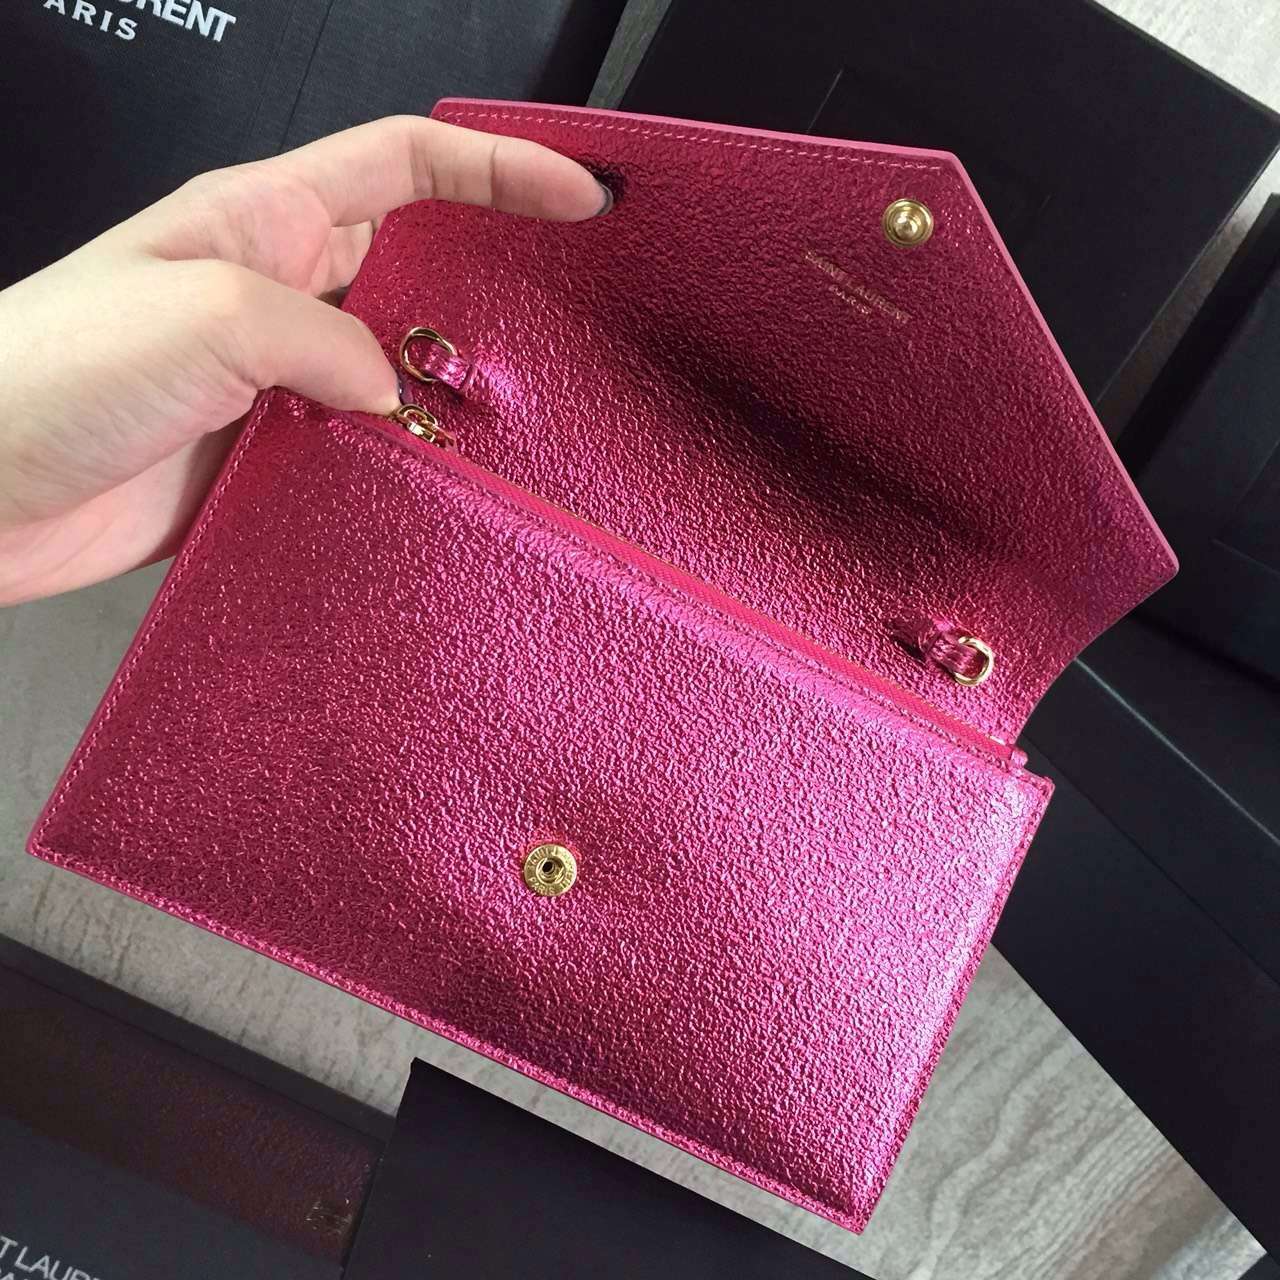 2016 Cheap YSL Out Sale with Free Shipping-Saint Laurent Monogram Envelope Chain Wallet in Lipstick Fuchsia Grain Leather - Click Image to Close